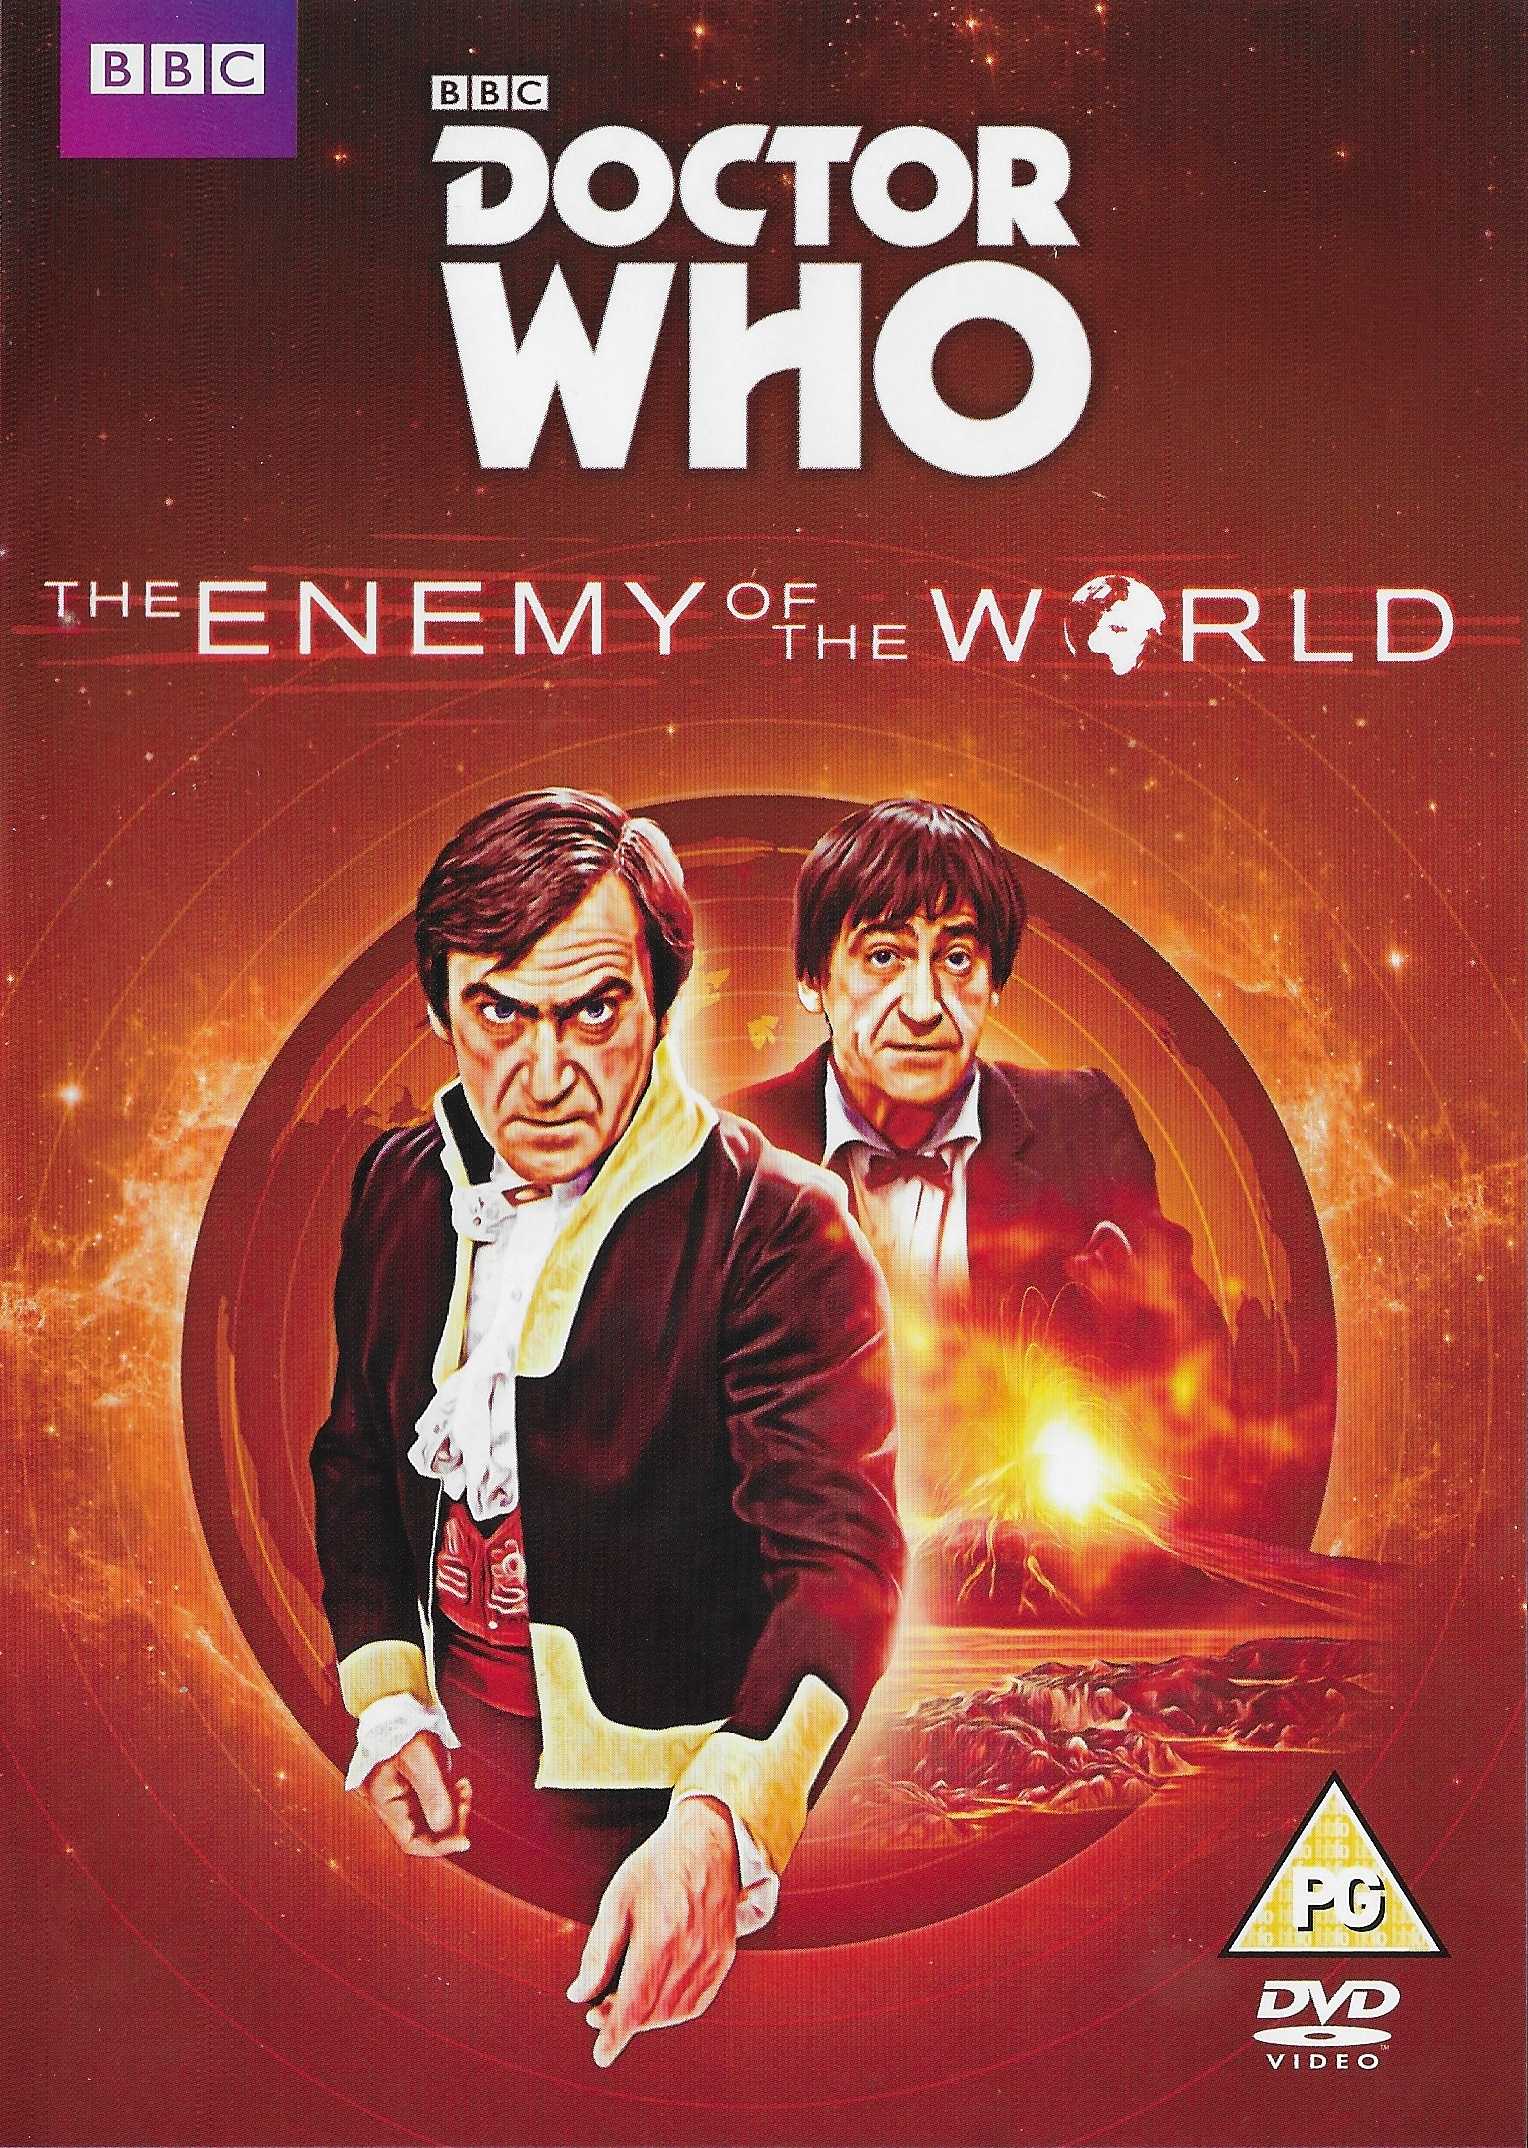 Picture of BBCDVD 3866 Doctor Who - The enemy of the world by artist David Whitaker from the BBC records and Tapes library